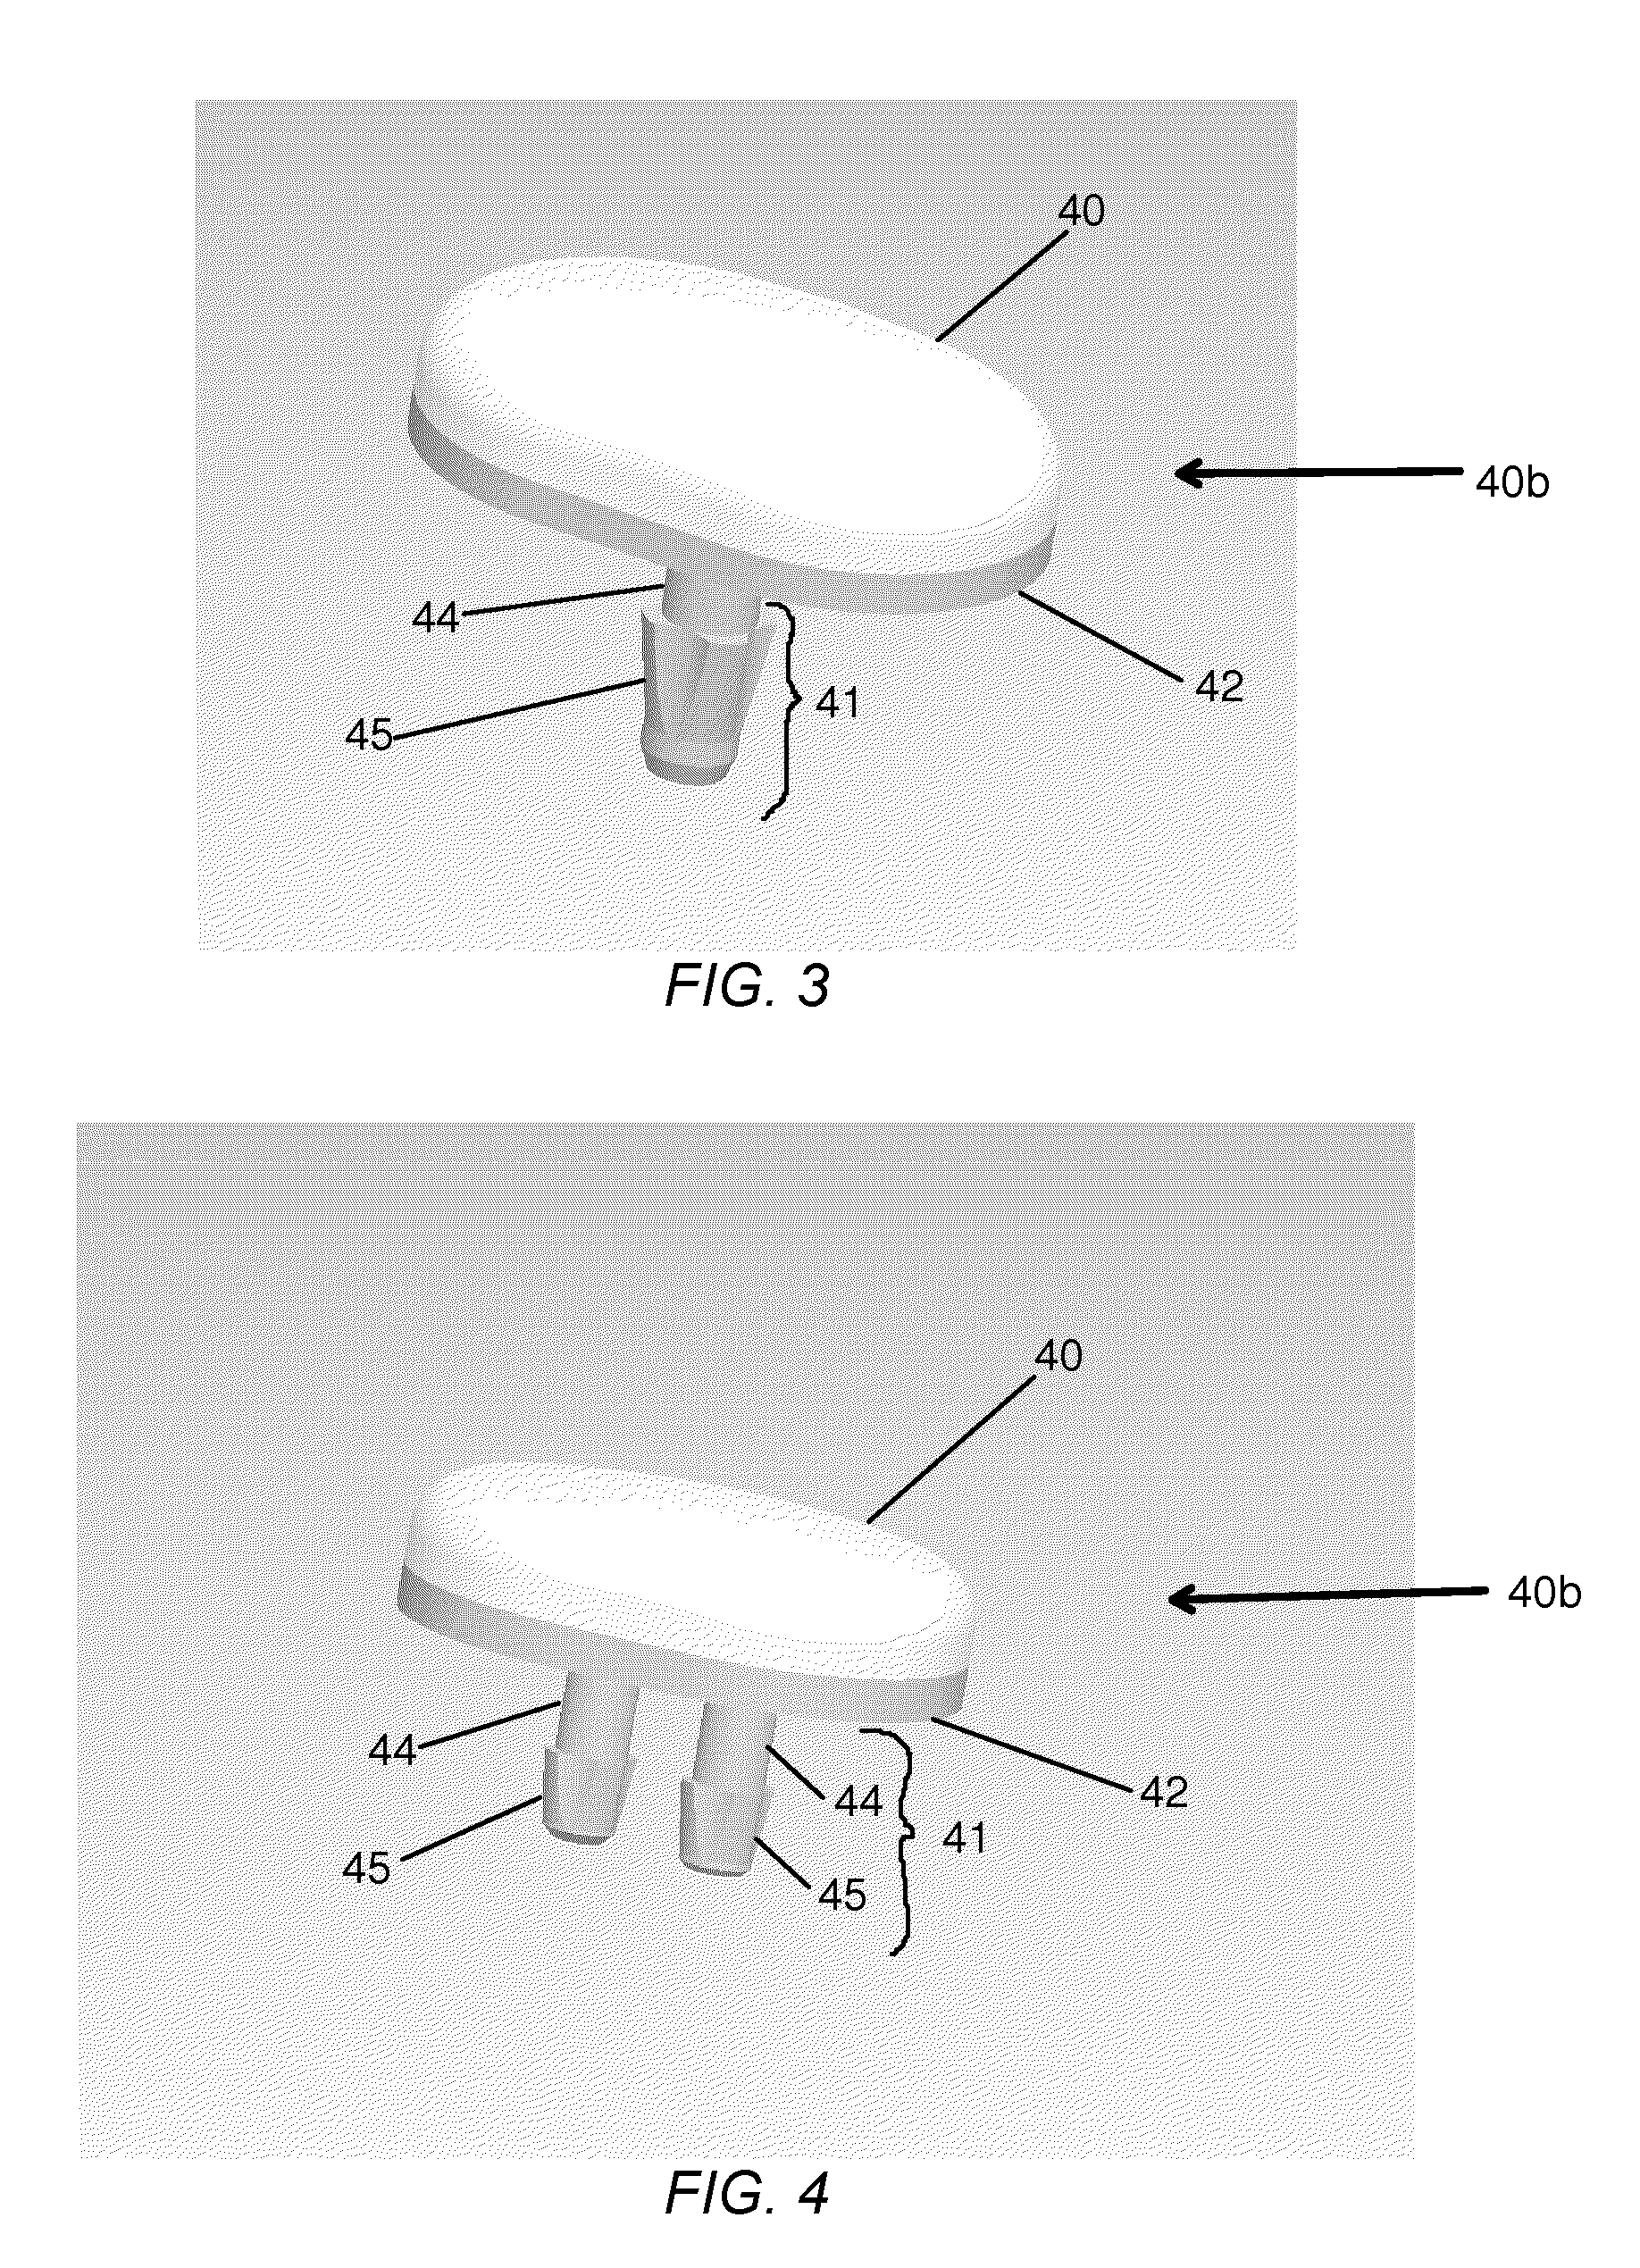 Partial joint resurfacing implant, instrumentation and method